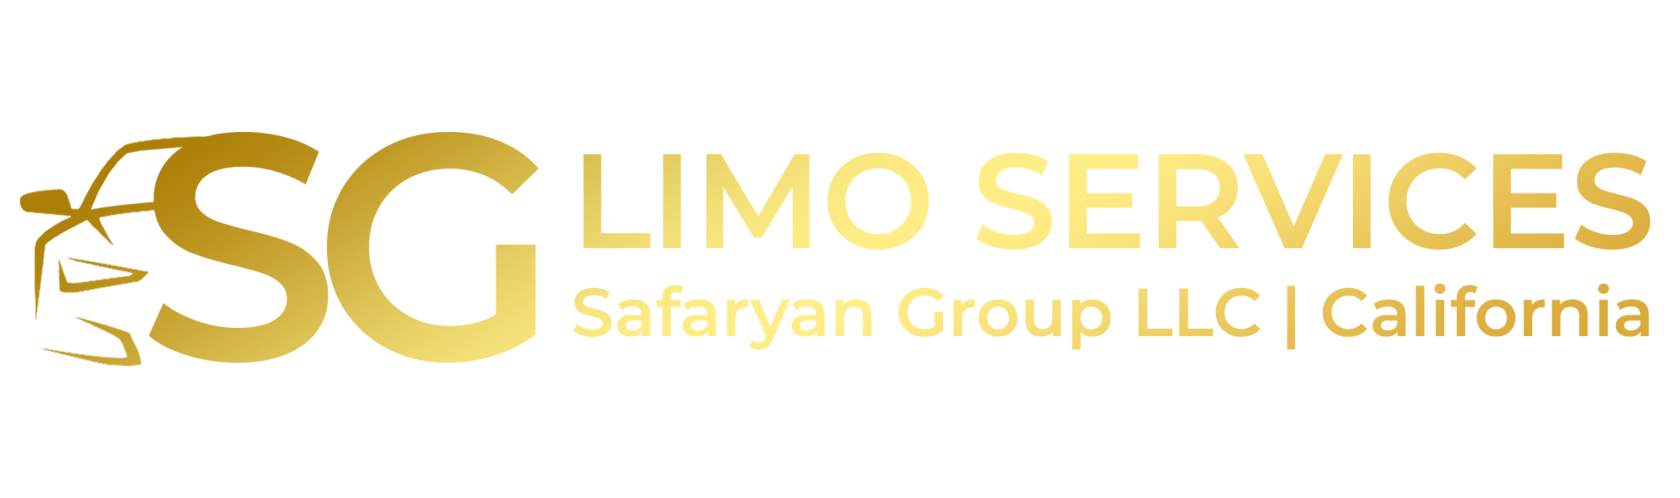 SG LimoServices